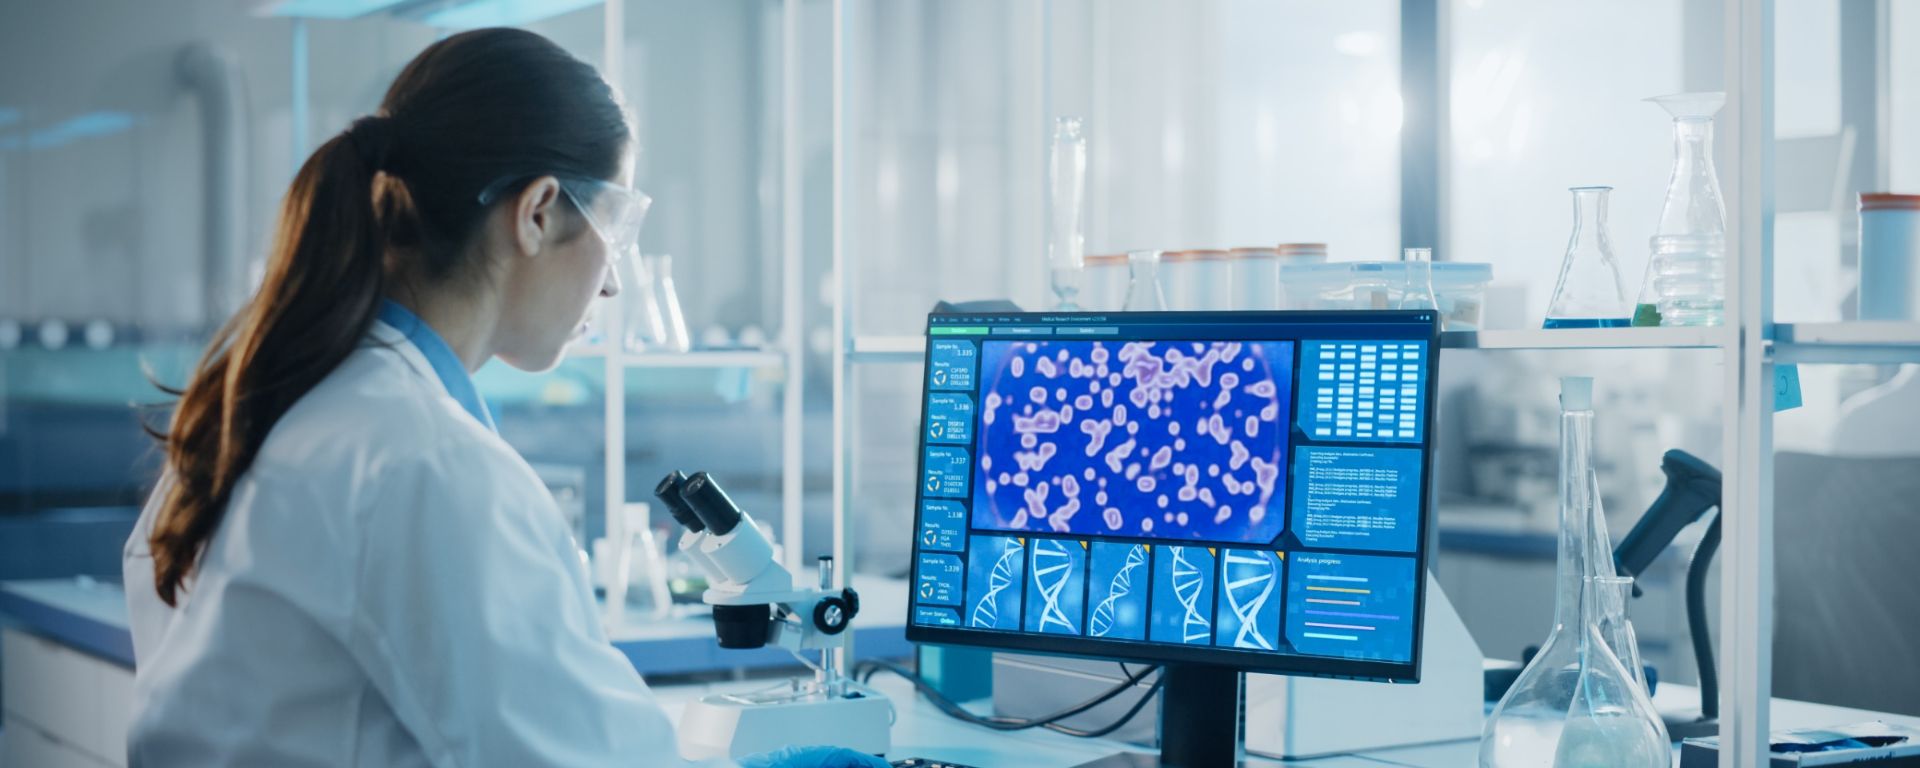 Person in a lab coat looks at a scan of cells on a screen